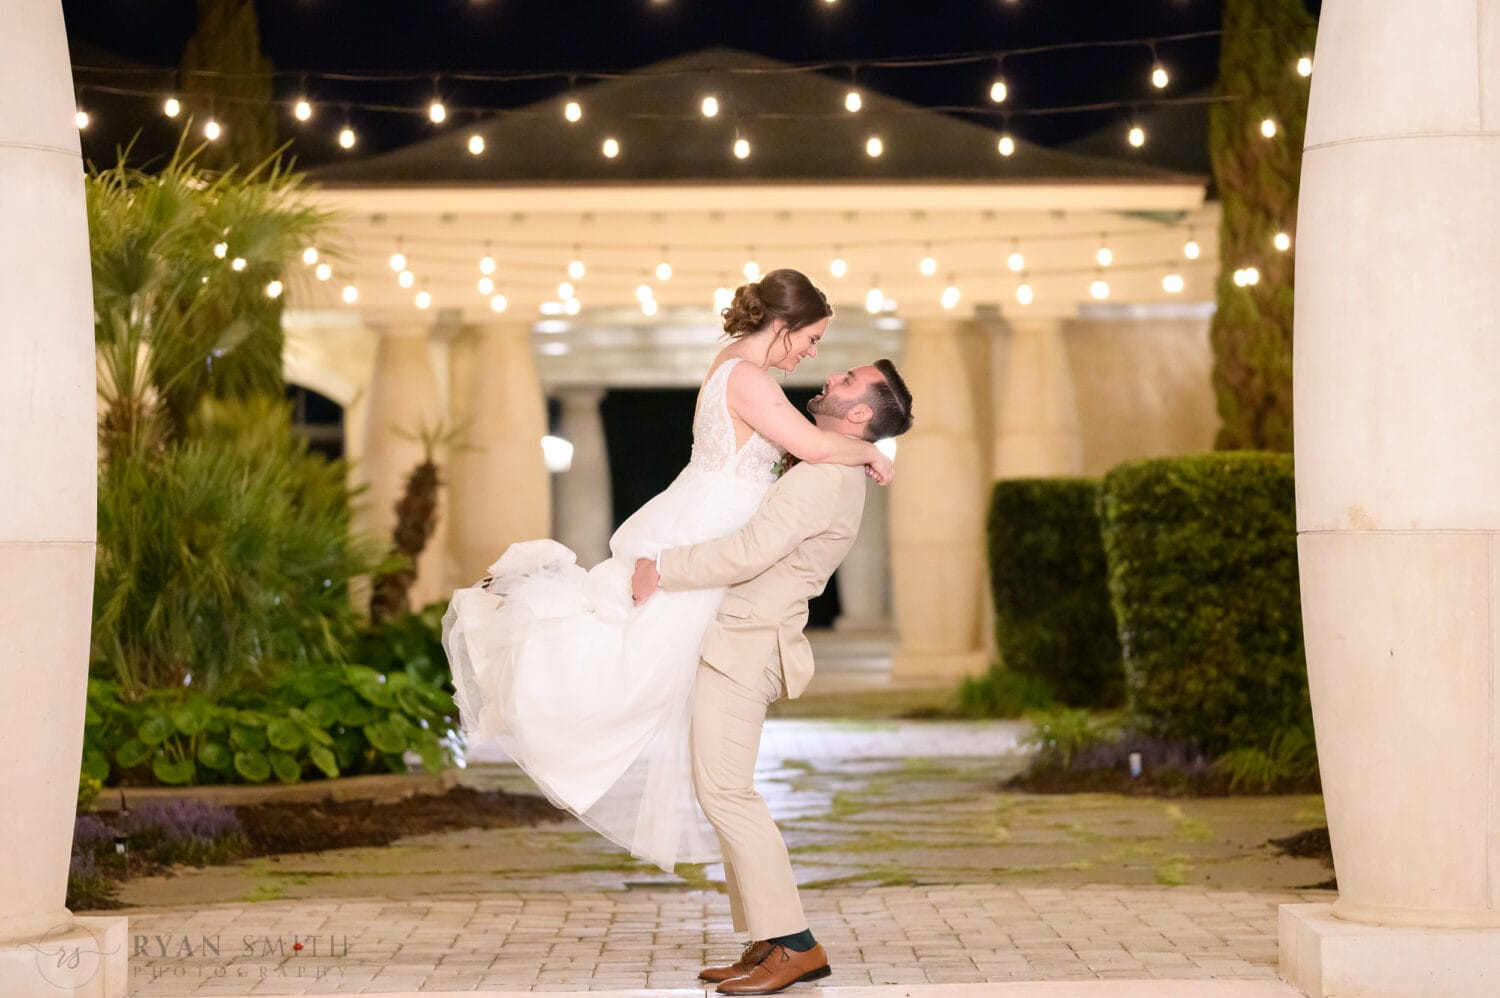 Lifting bride into the air at night in the courtyard - 21 Main Events